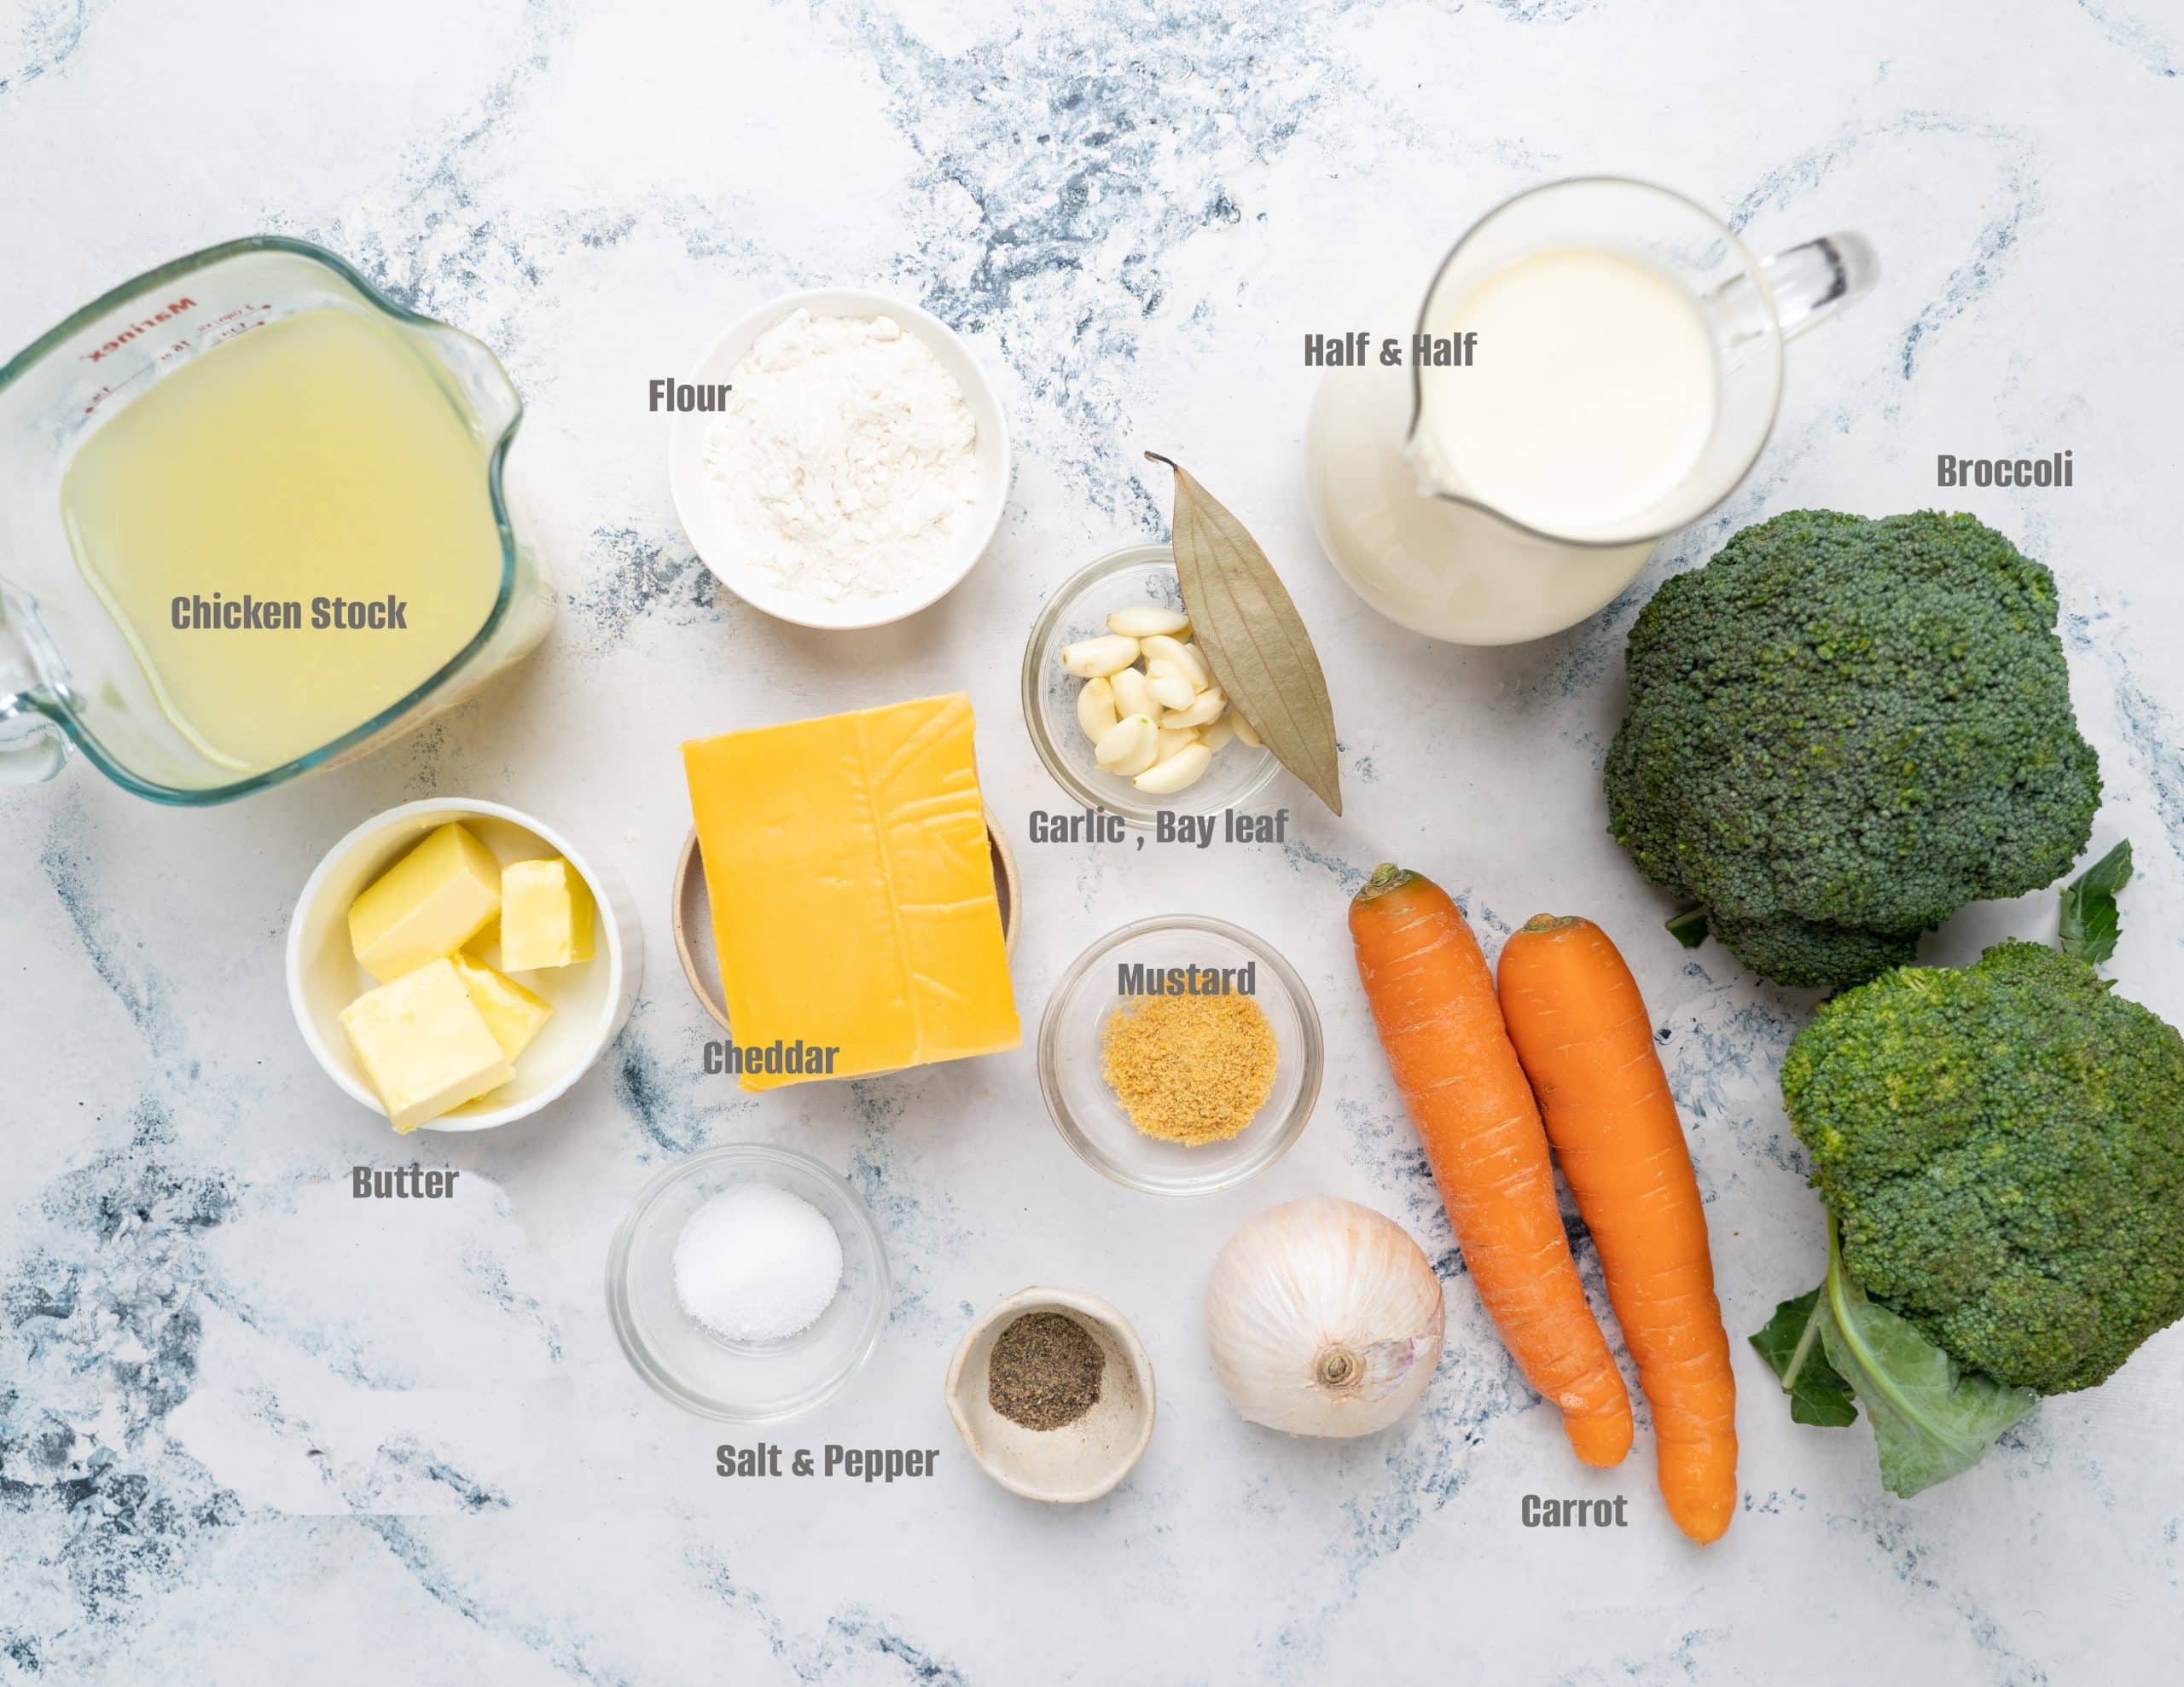 Ingredients for Broccoli Cheddar soup